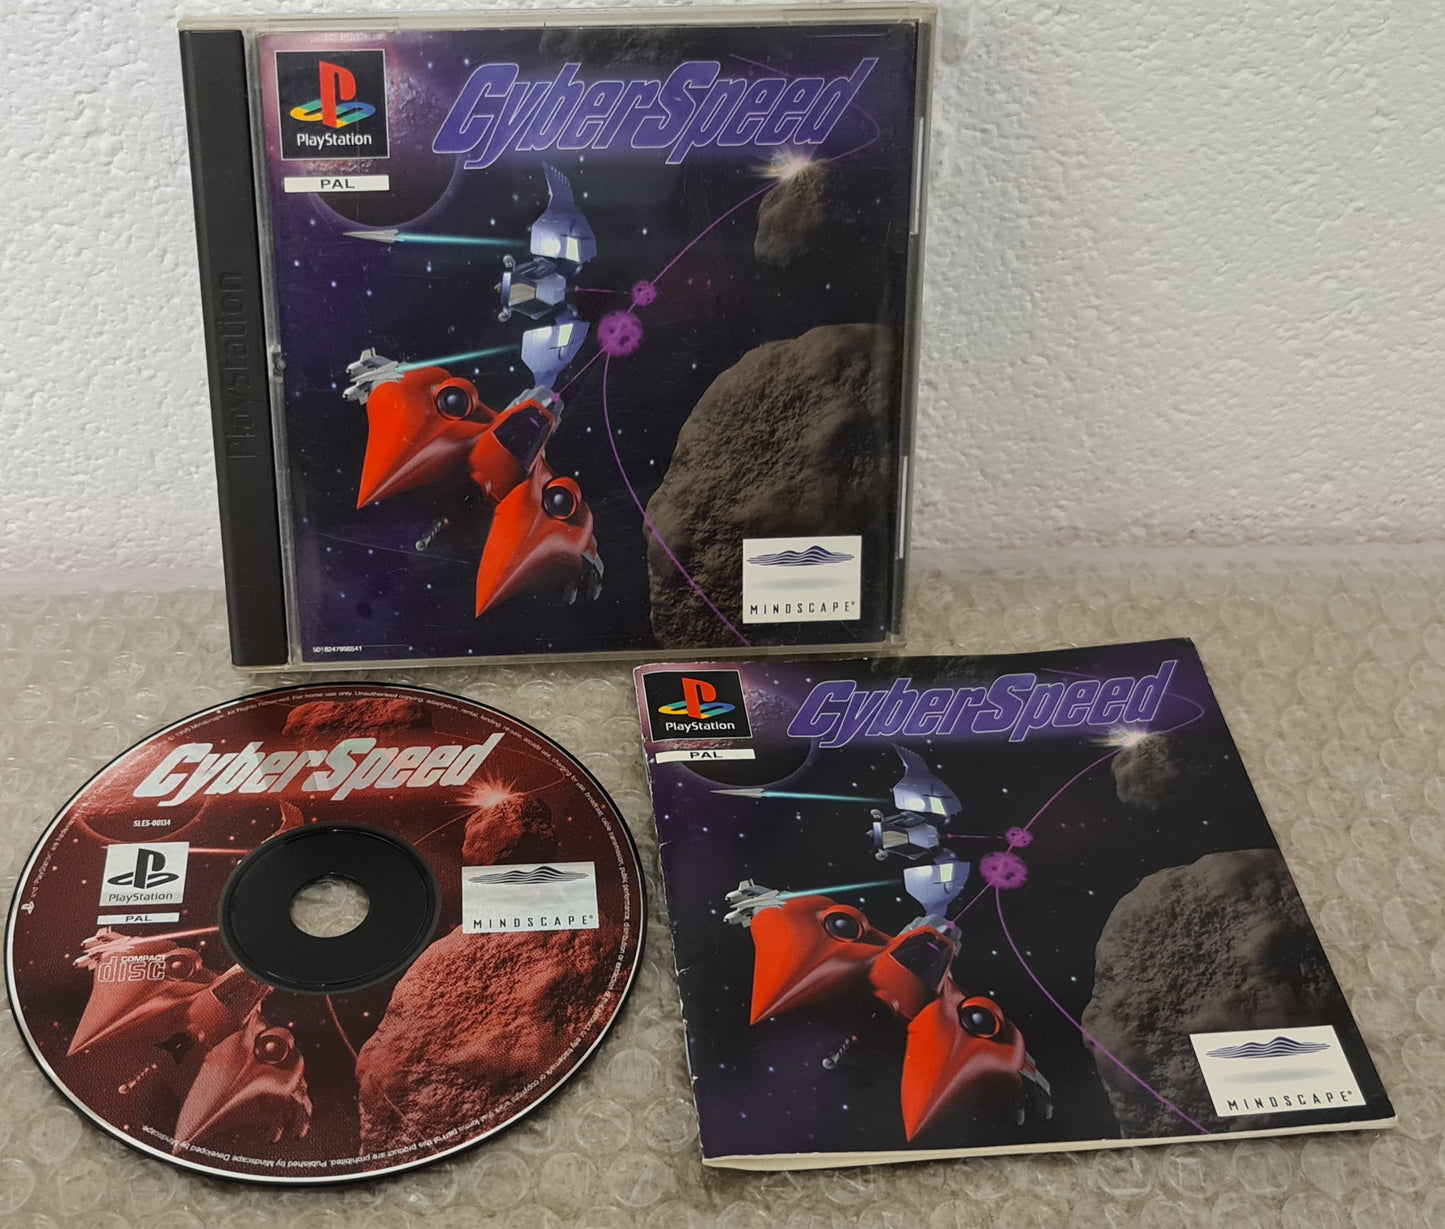 CyberSpeed Sony Playstation 1 (PS1) Game